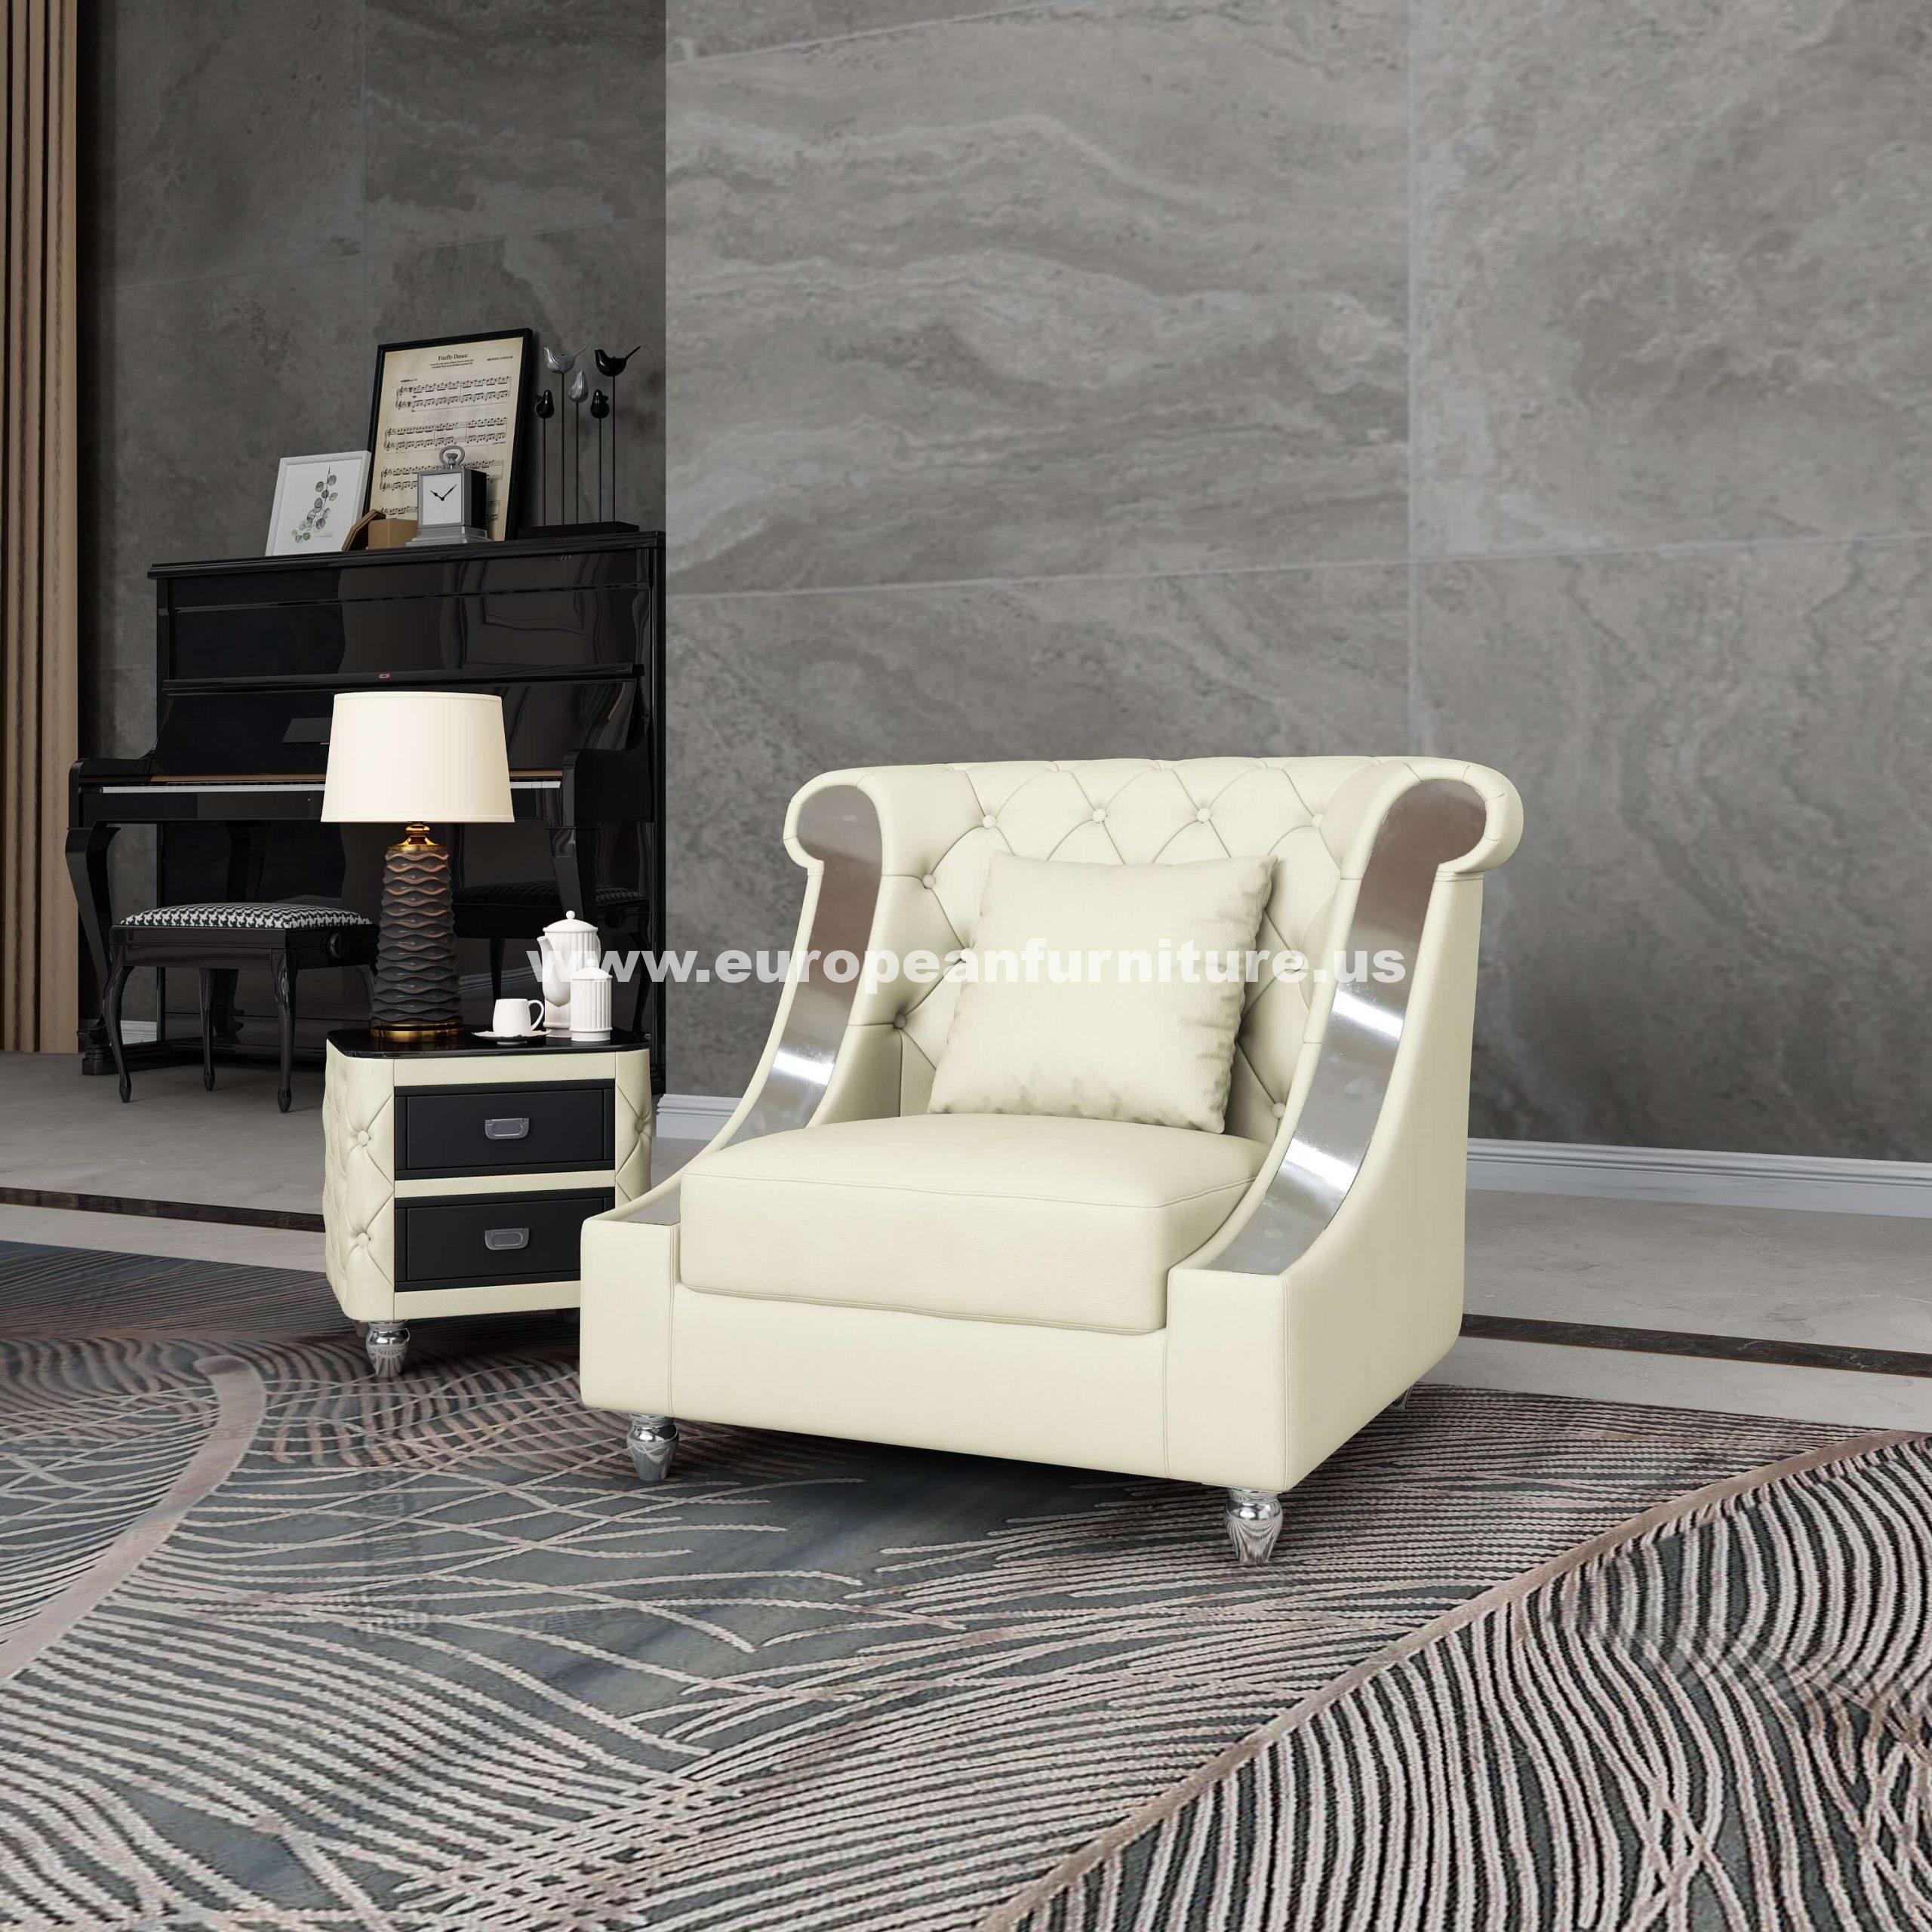 Contemporary, Modern Arm Chairs MAYFAIR EF-90280-C in Off-White Leather